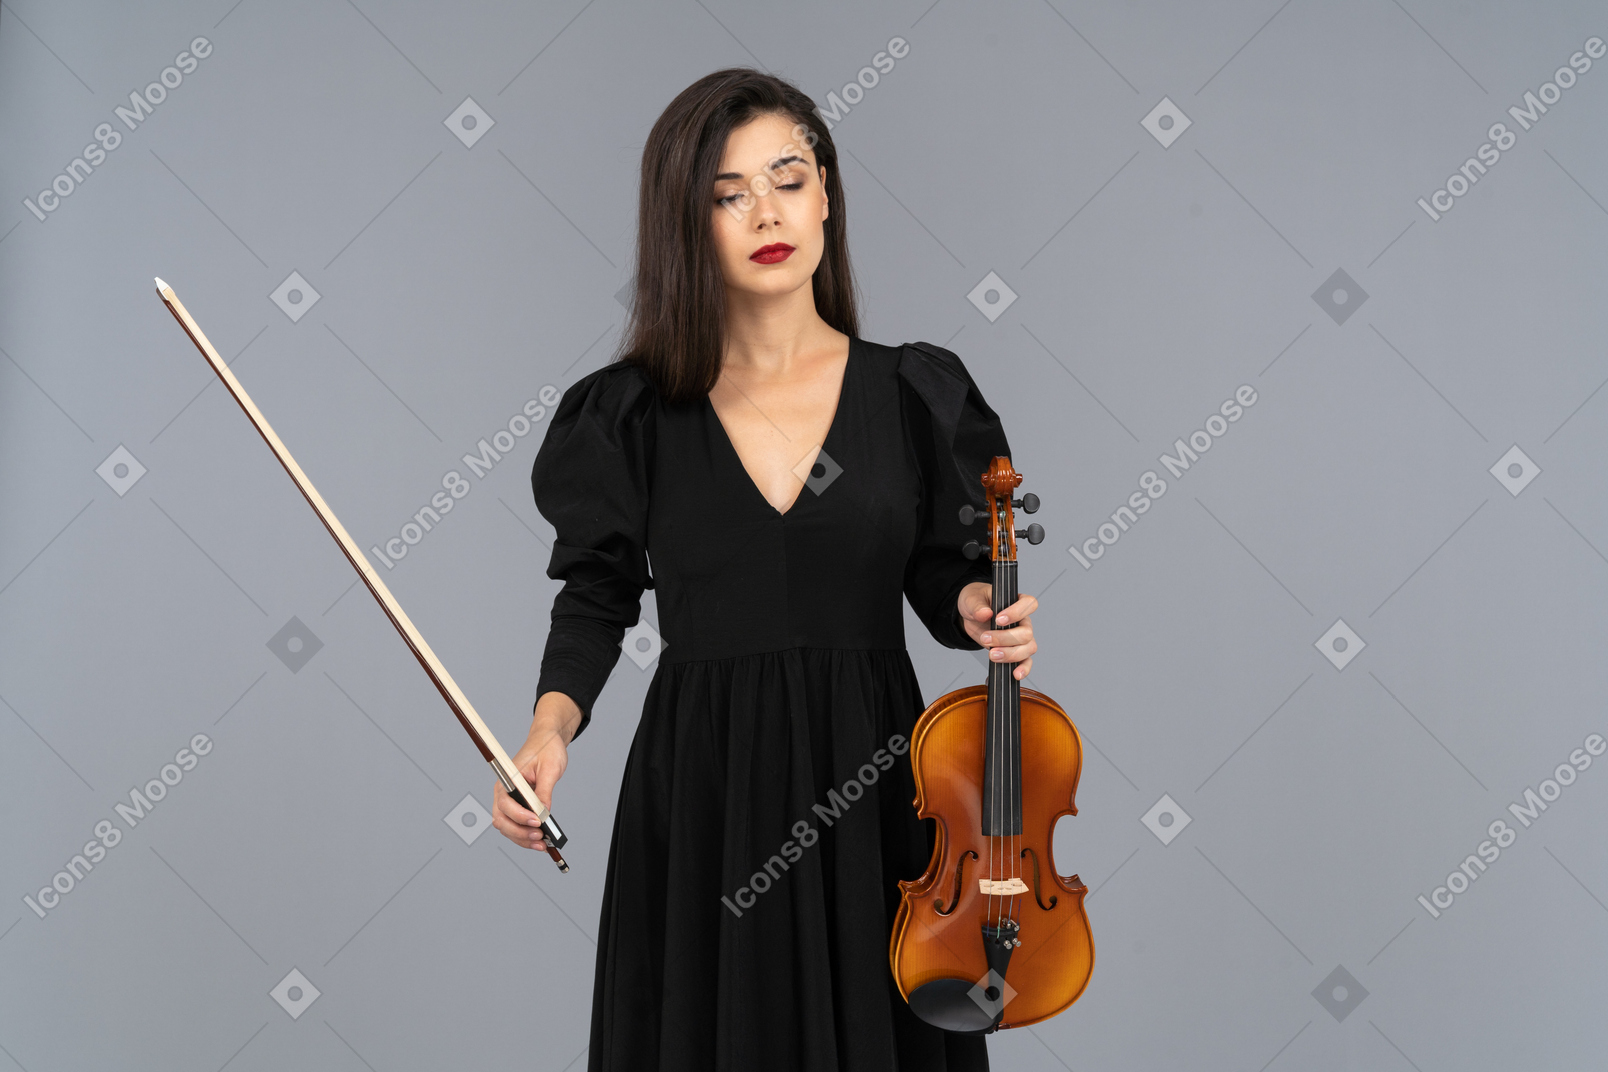 Close-up of a young lady in black dress holding the violin and the bow